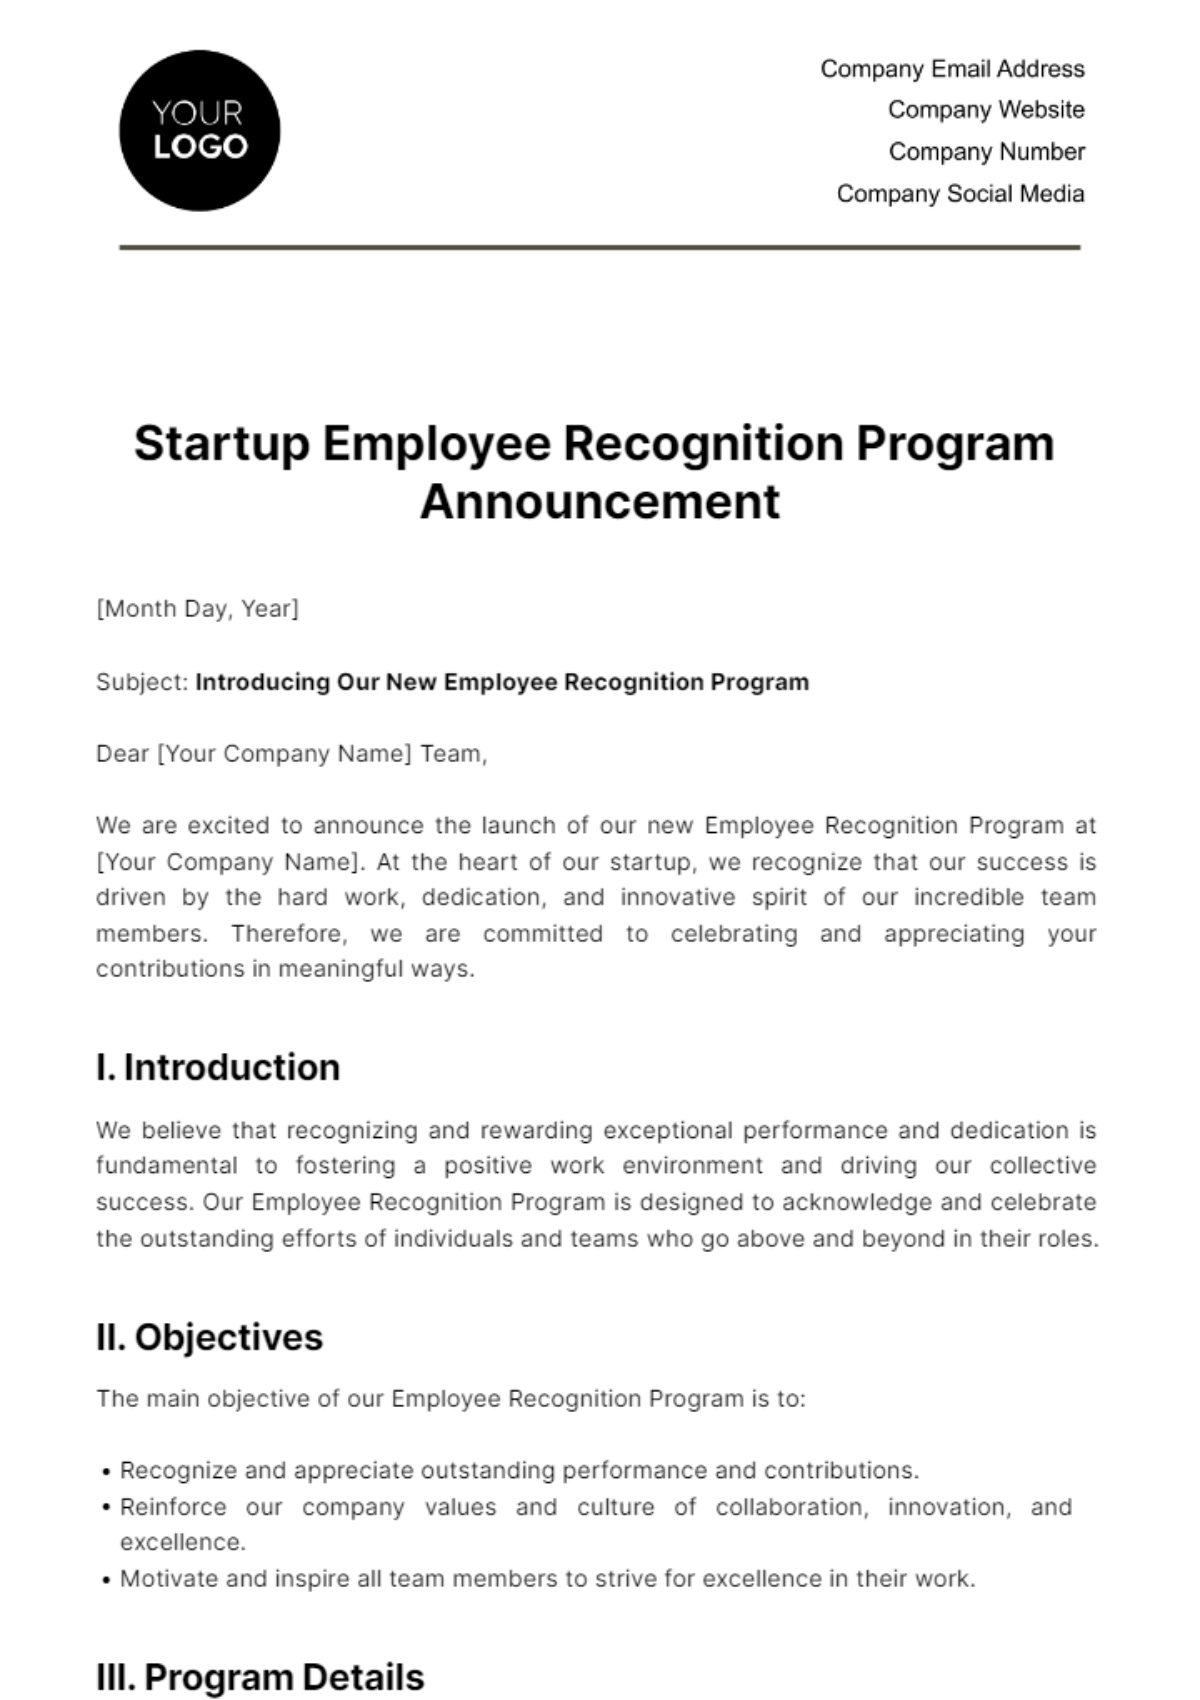 Startup Employee Recognition Program Announcement Template